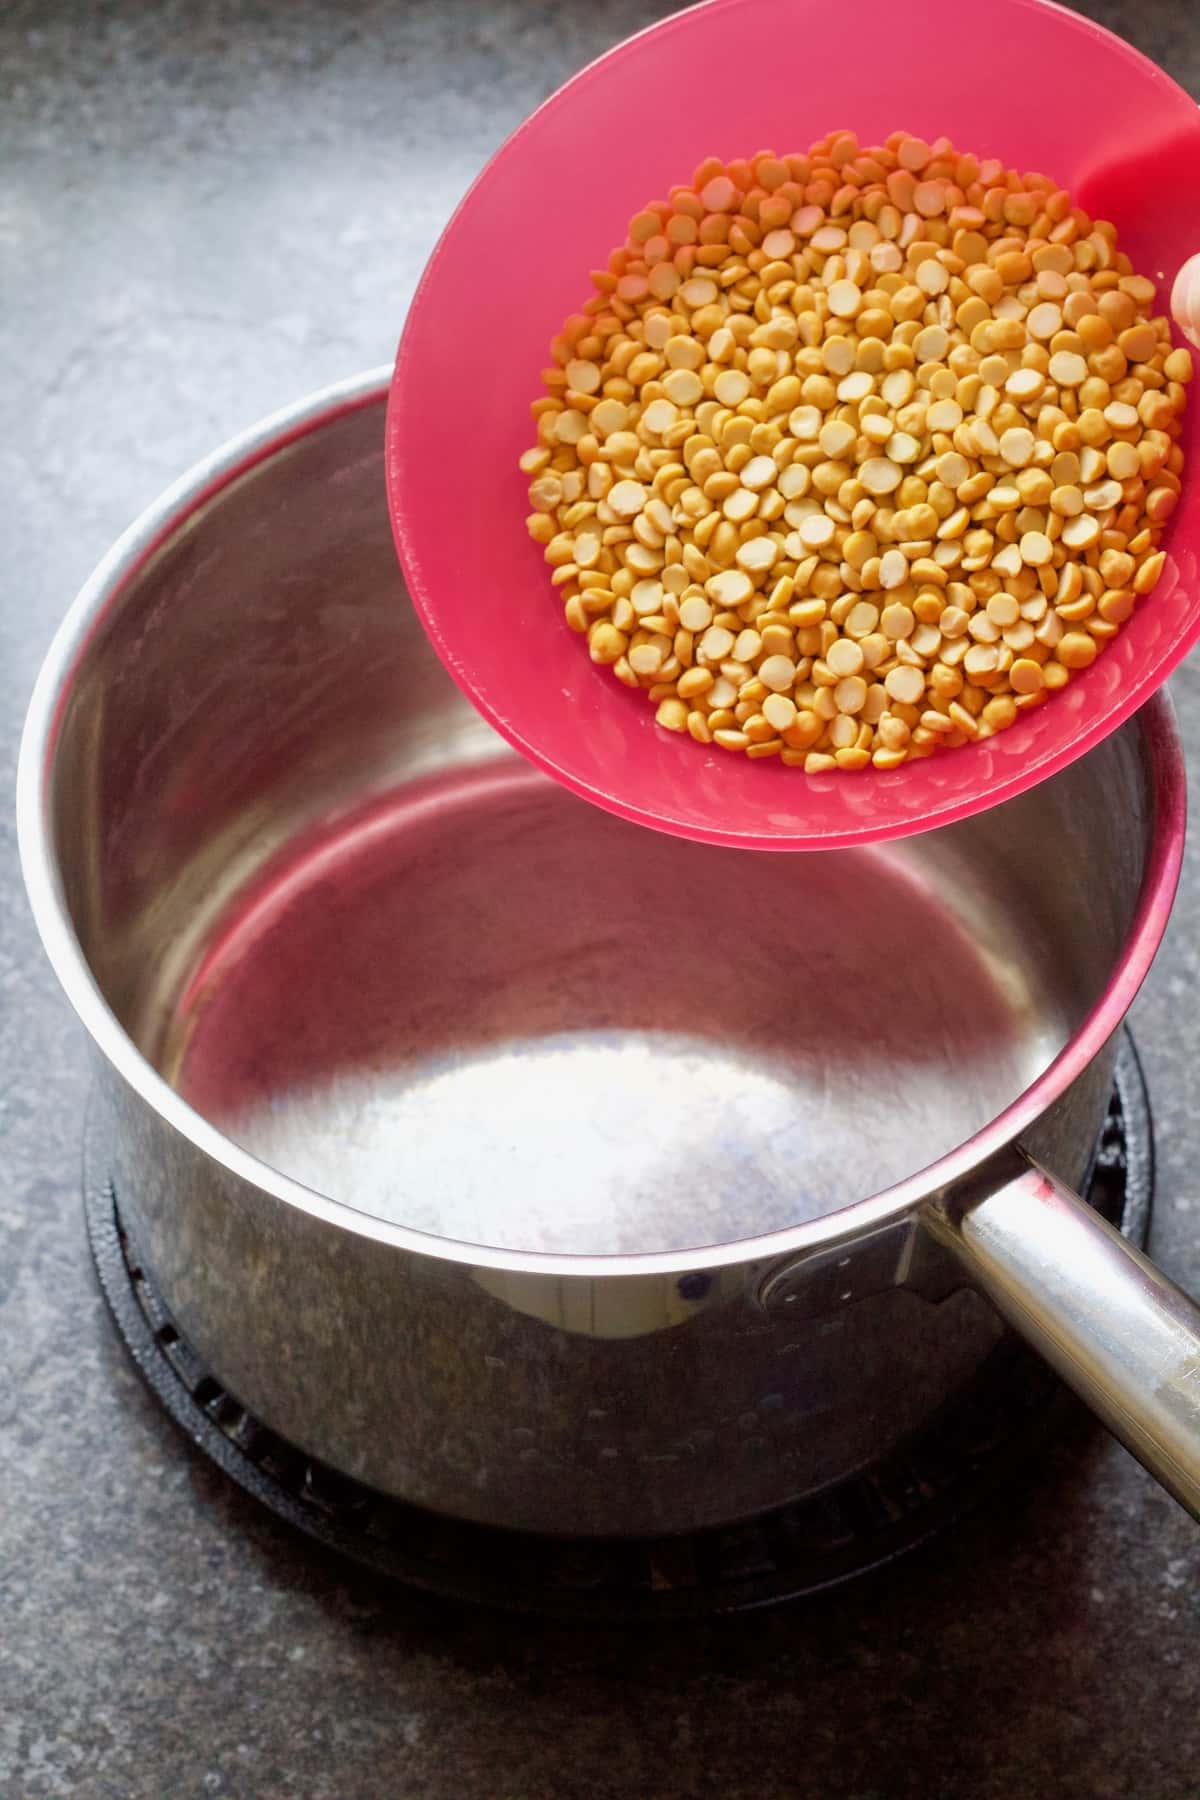 Rinsed chana dhal being added to the pan.